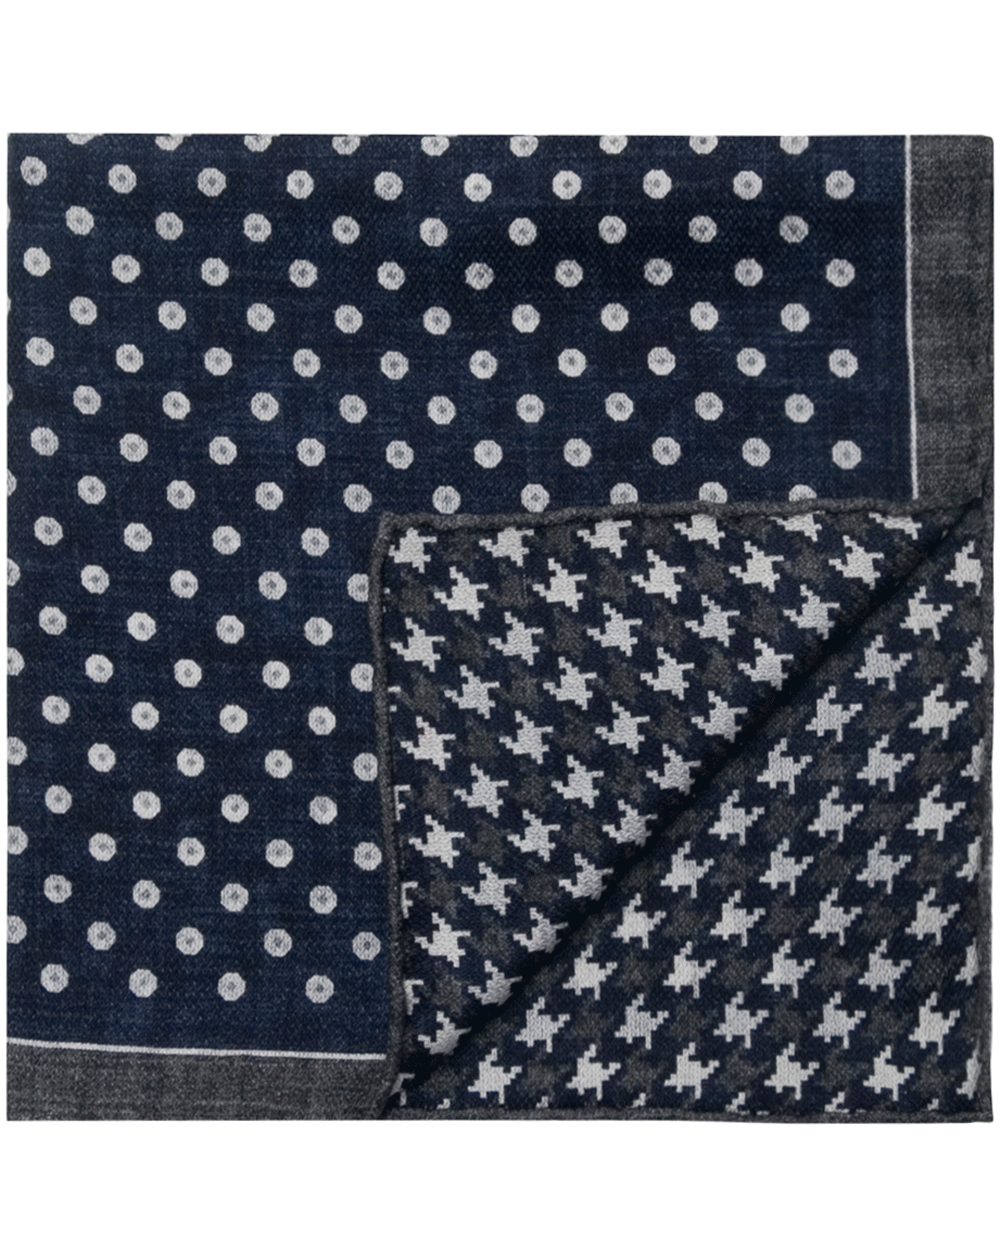 Navy and Grey Dots Houndstooth Reversible Pocket Square